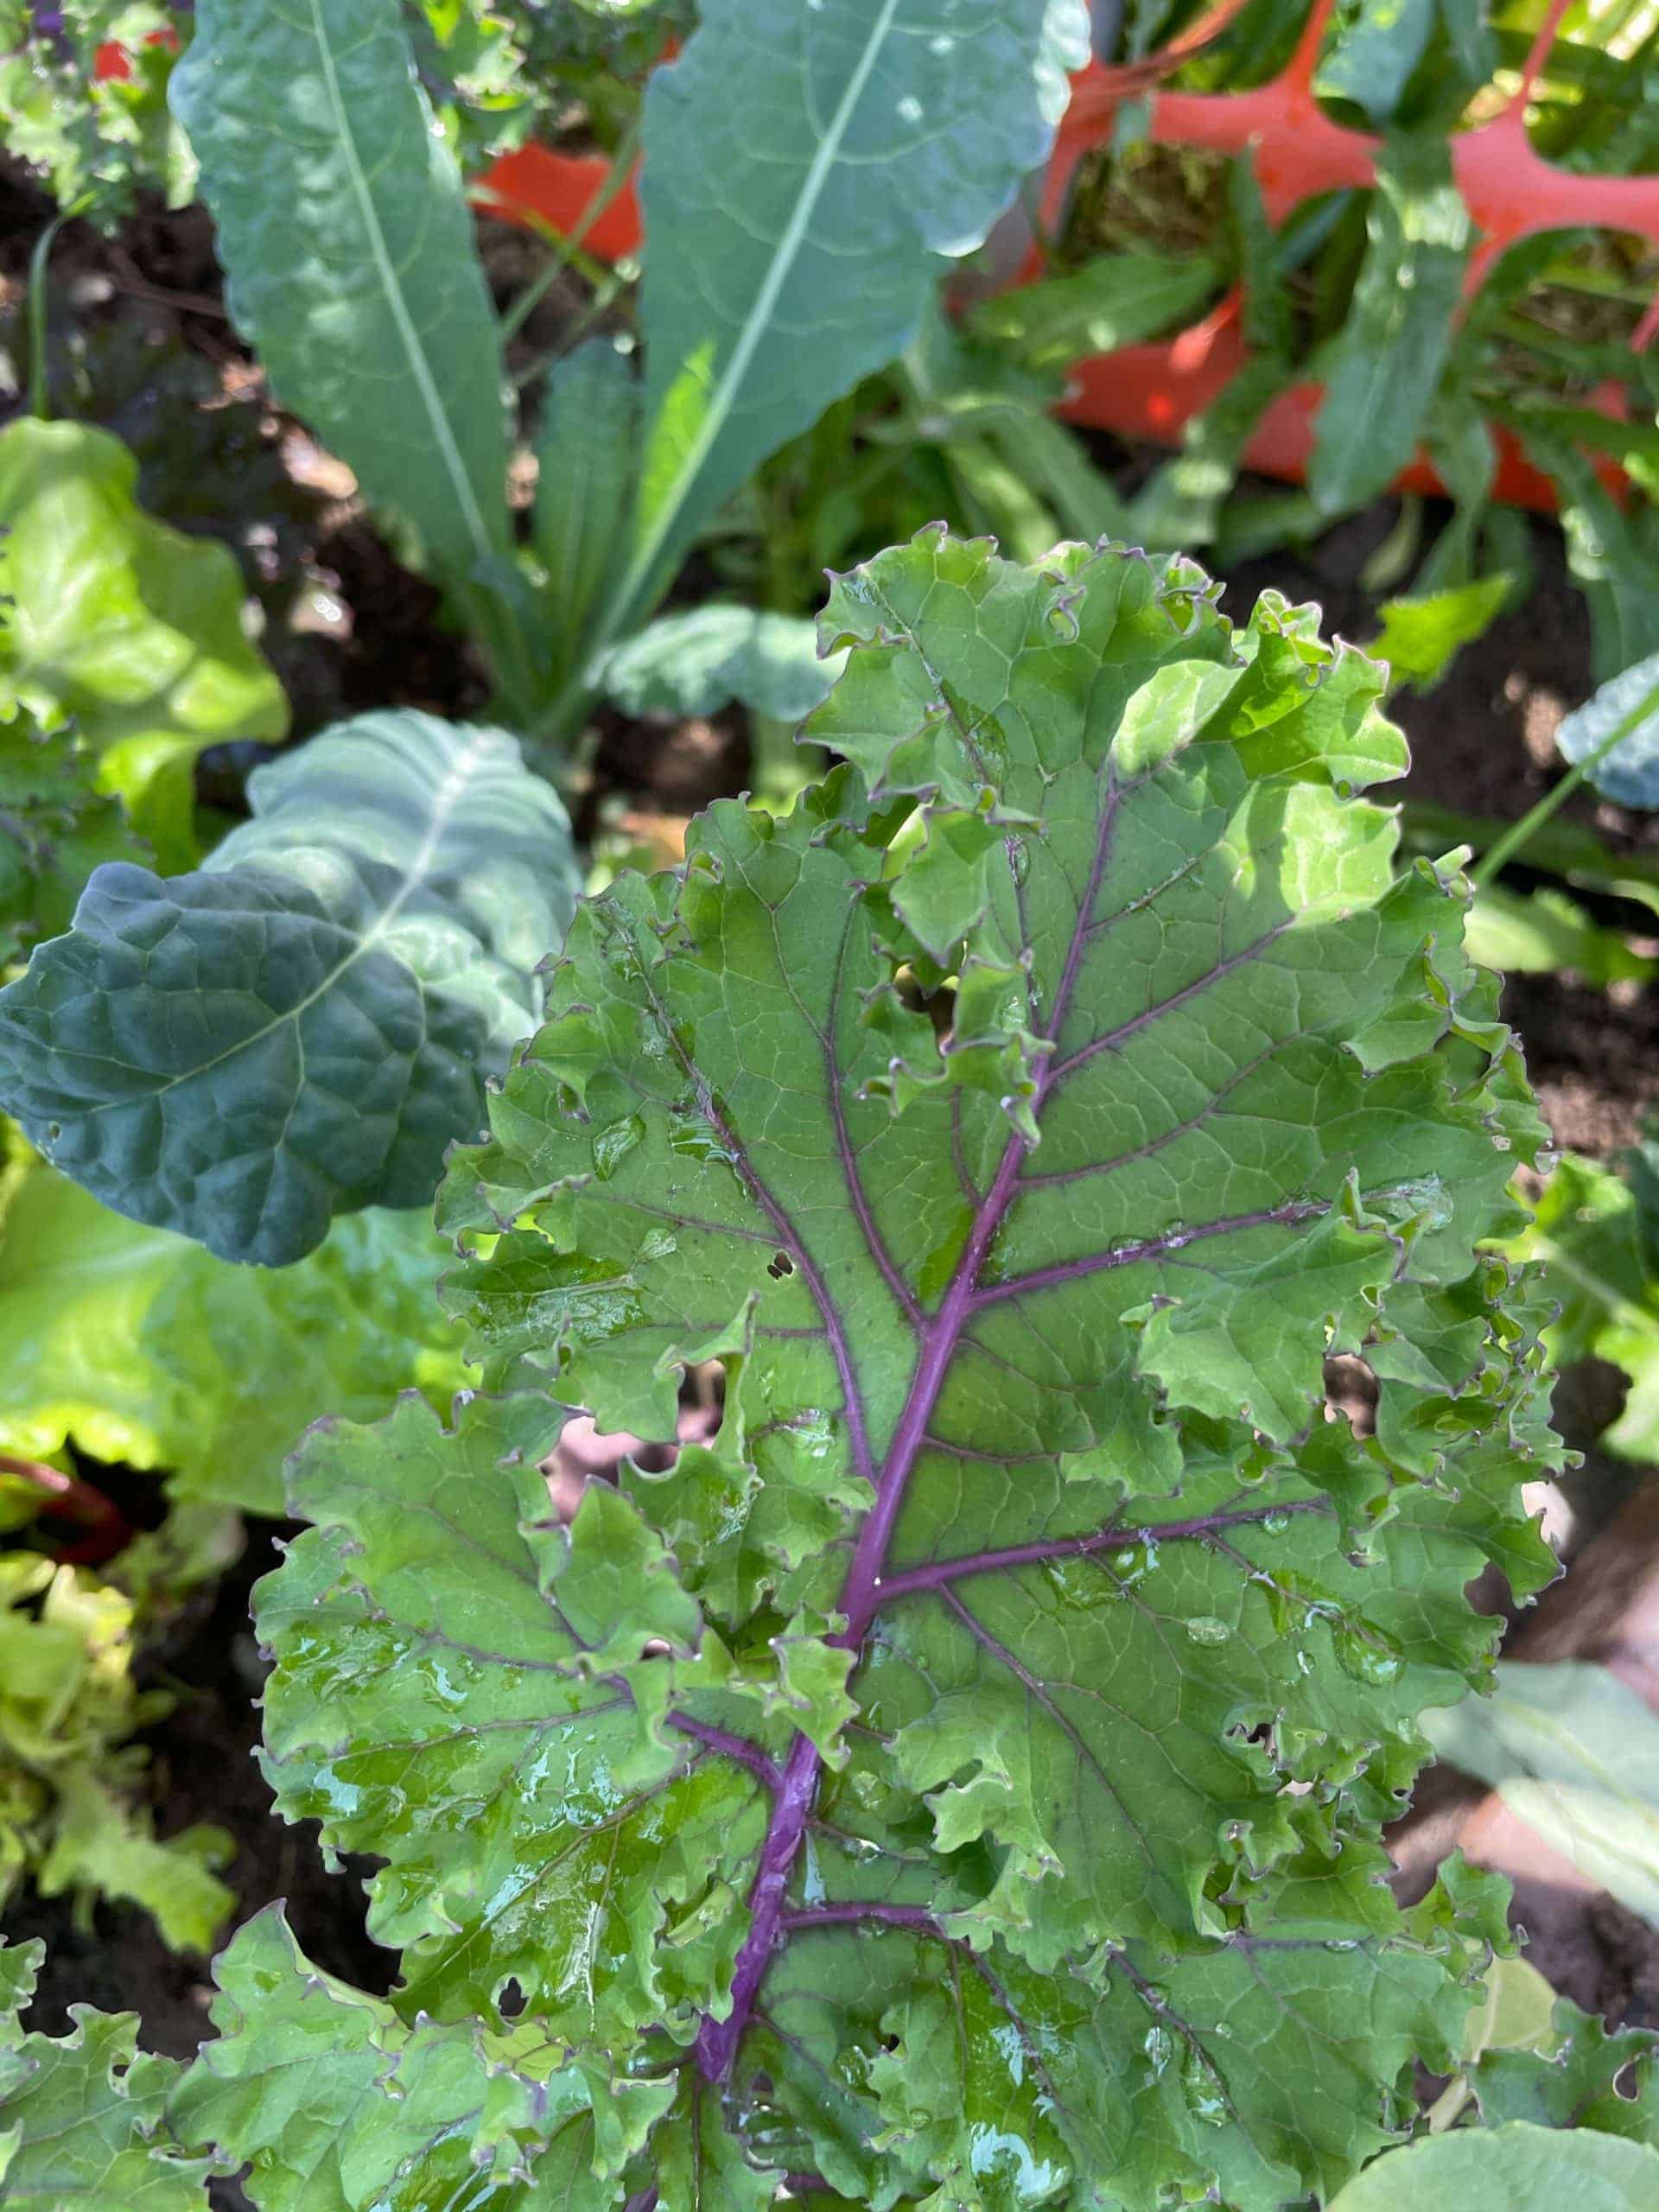 Kale: mixed bunch of red, dinasour, and curly green kale